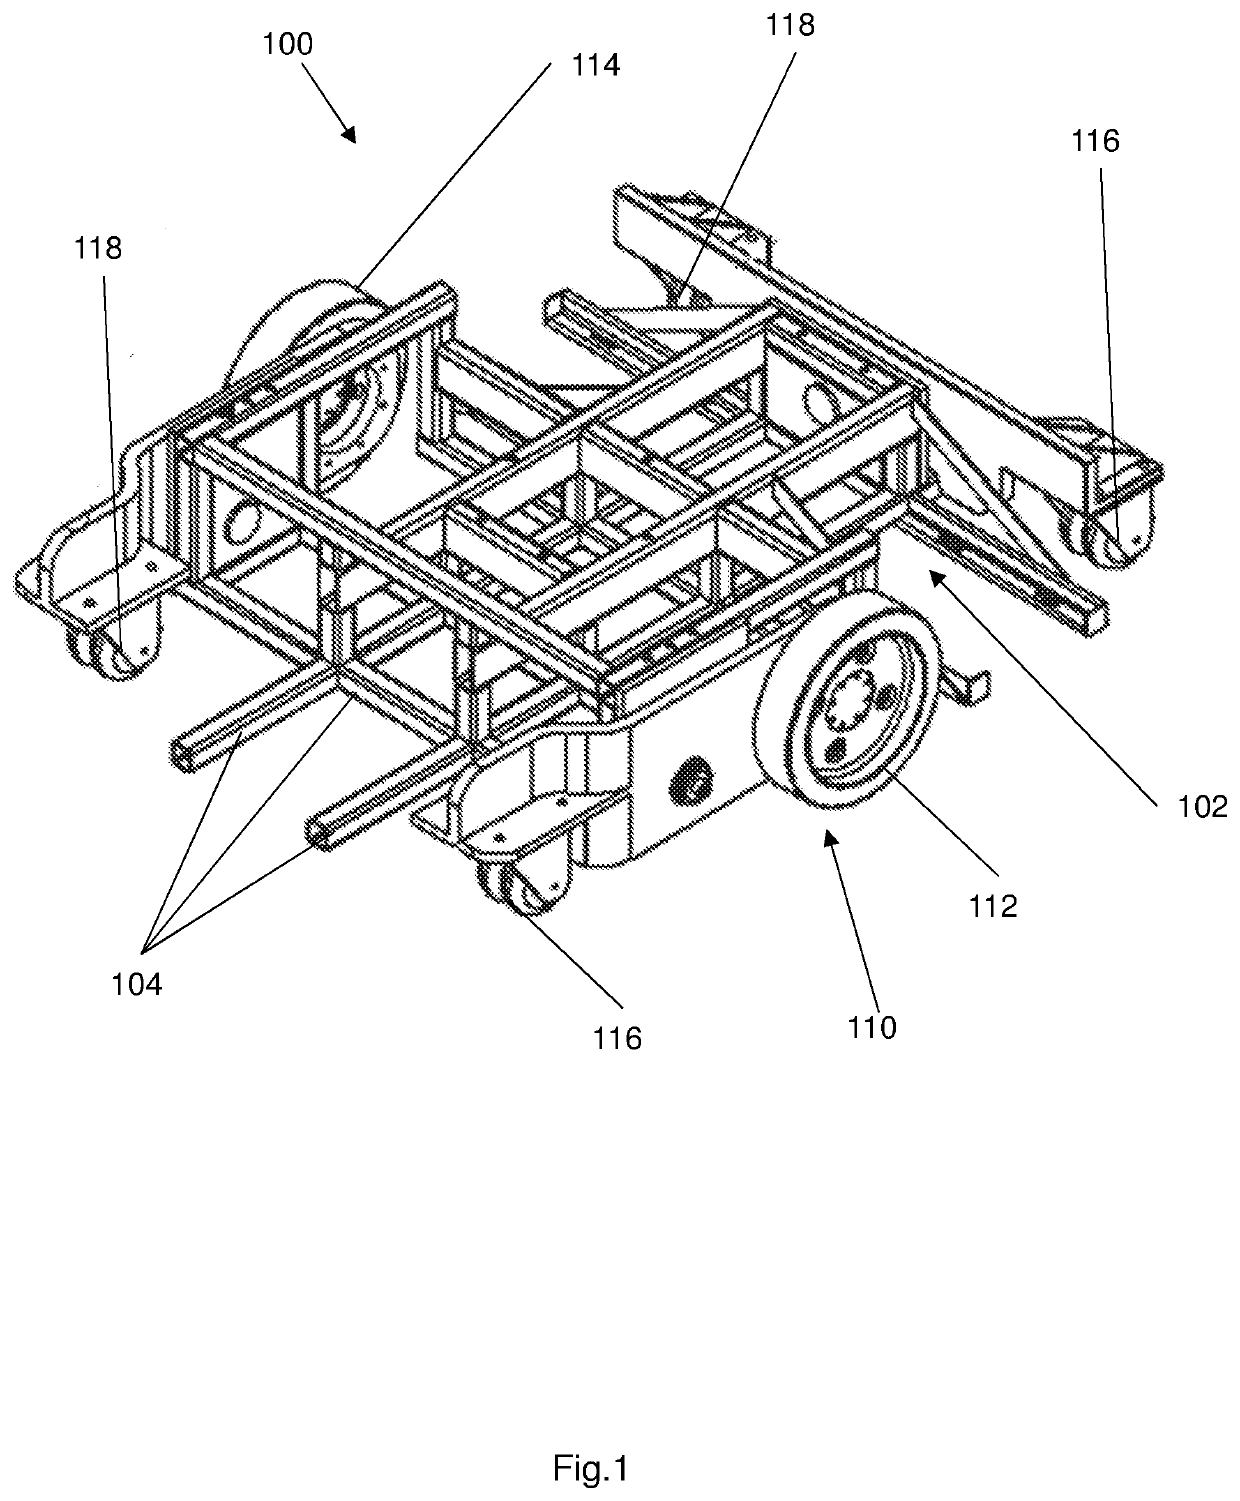 Load supporting apparatus for an automated guide vehicle